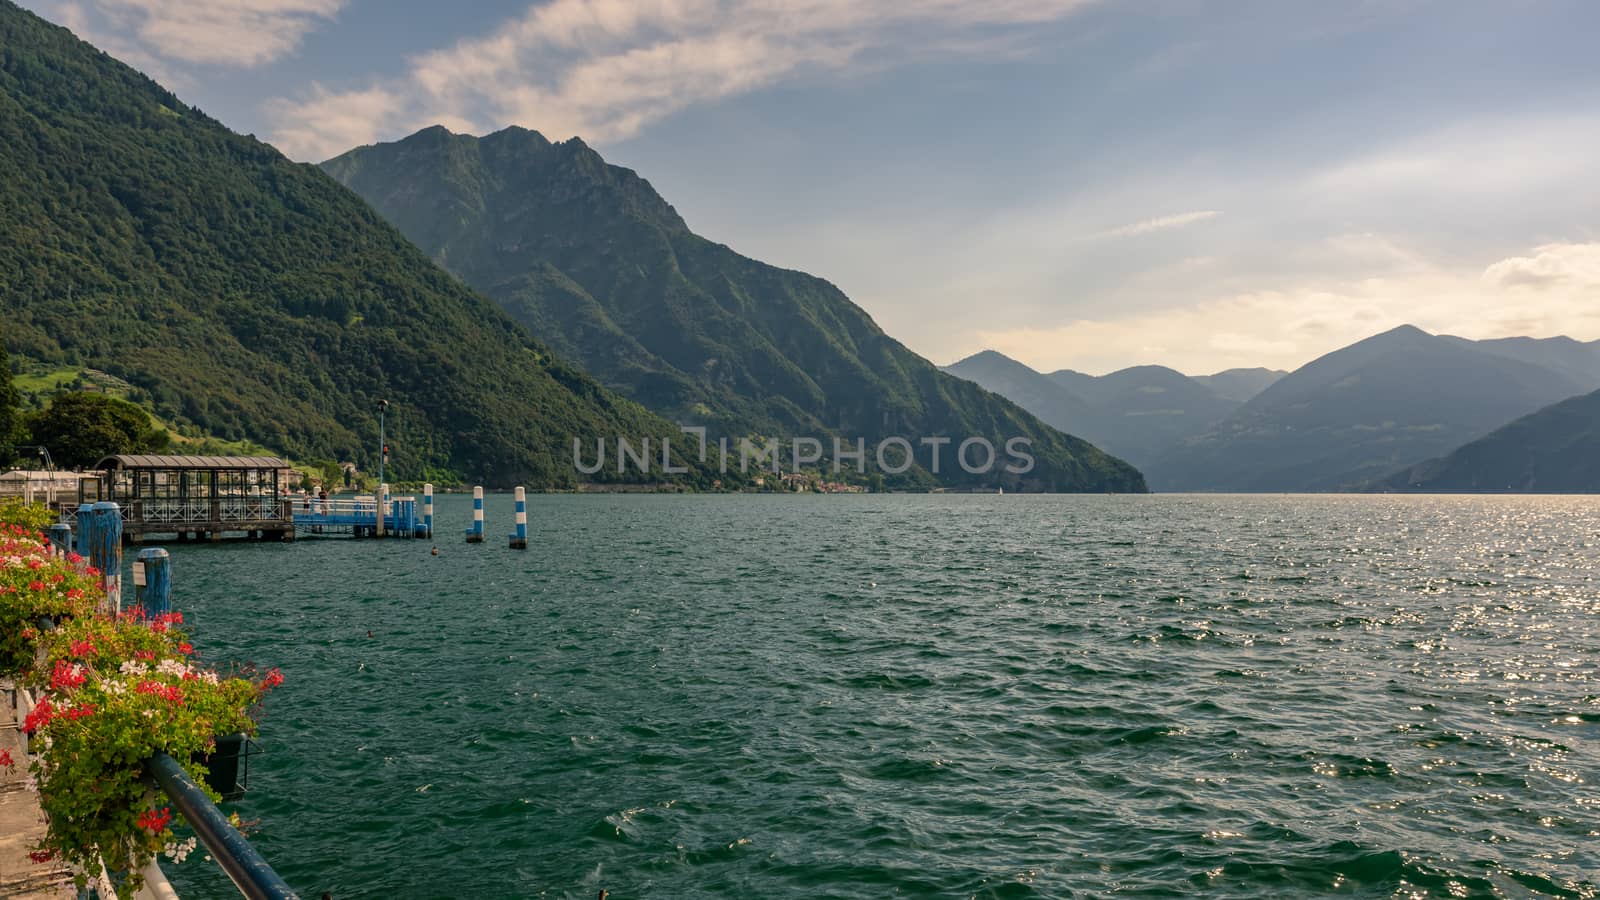 A wonderful view of the Iseo lake from Pisogne town.